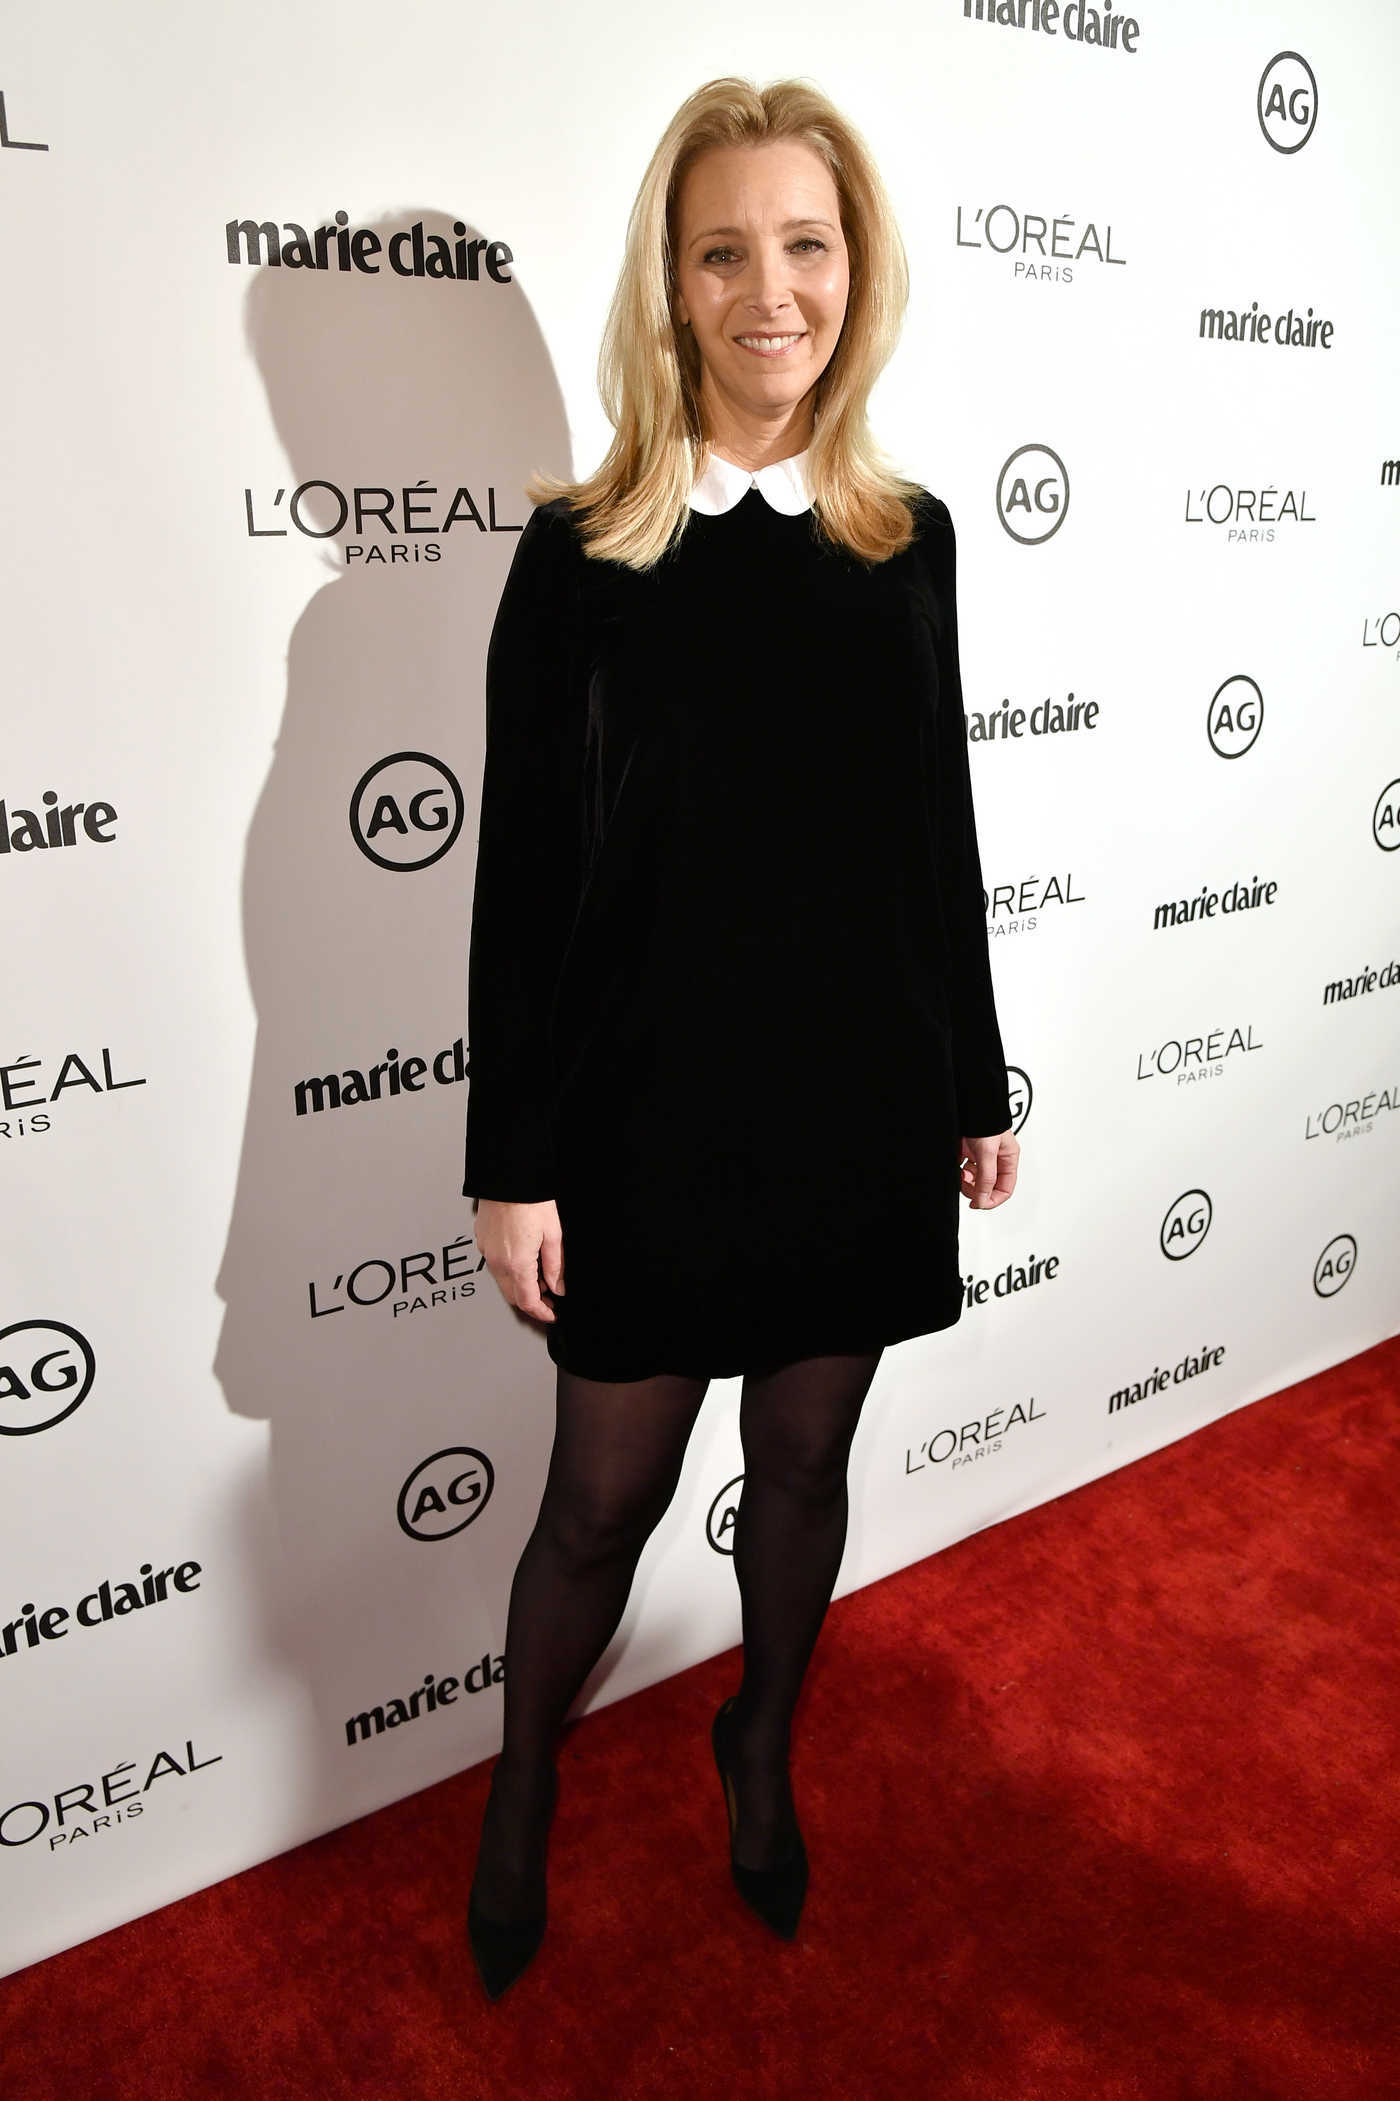 Lisa Kudrow at the Marie Claire Image Maker Awards in Los Angeles 10/01/2017